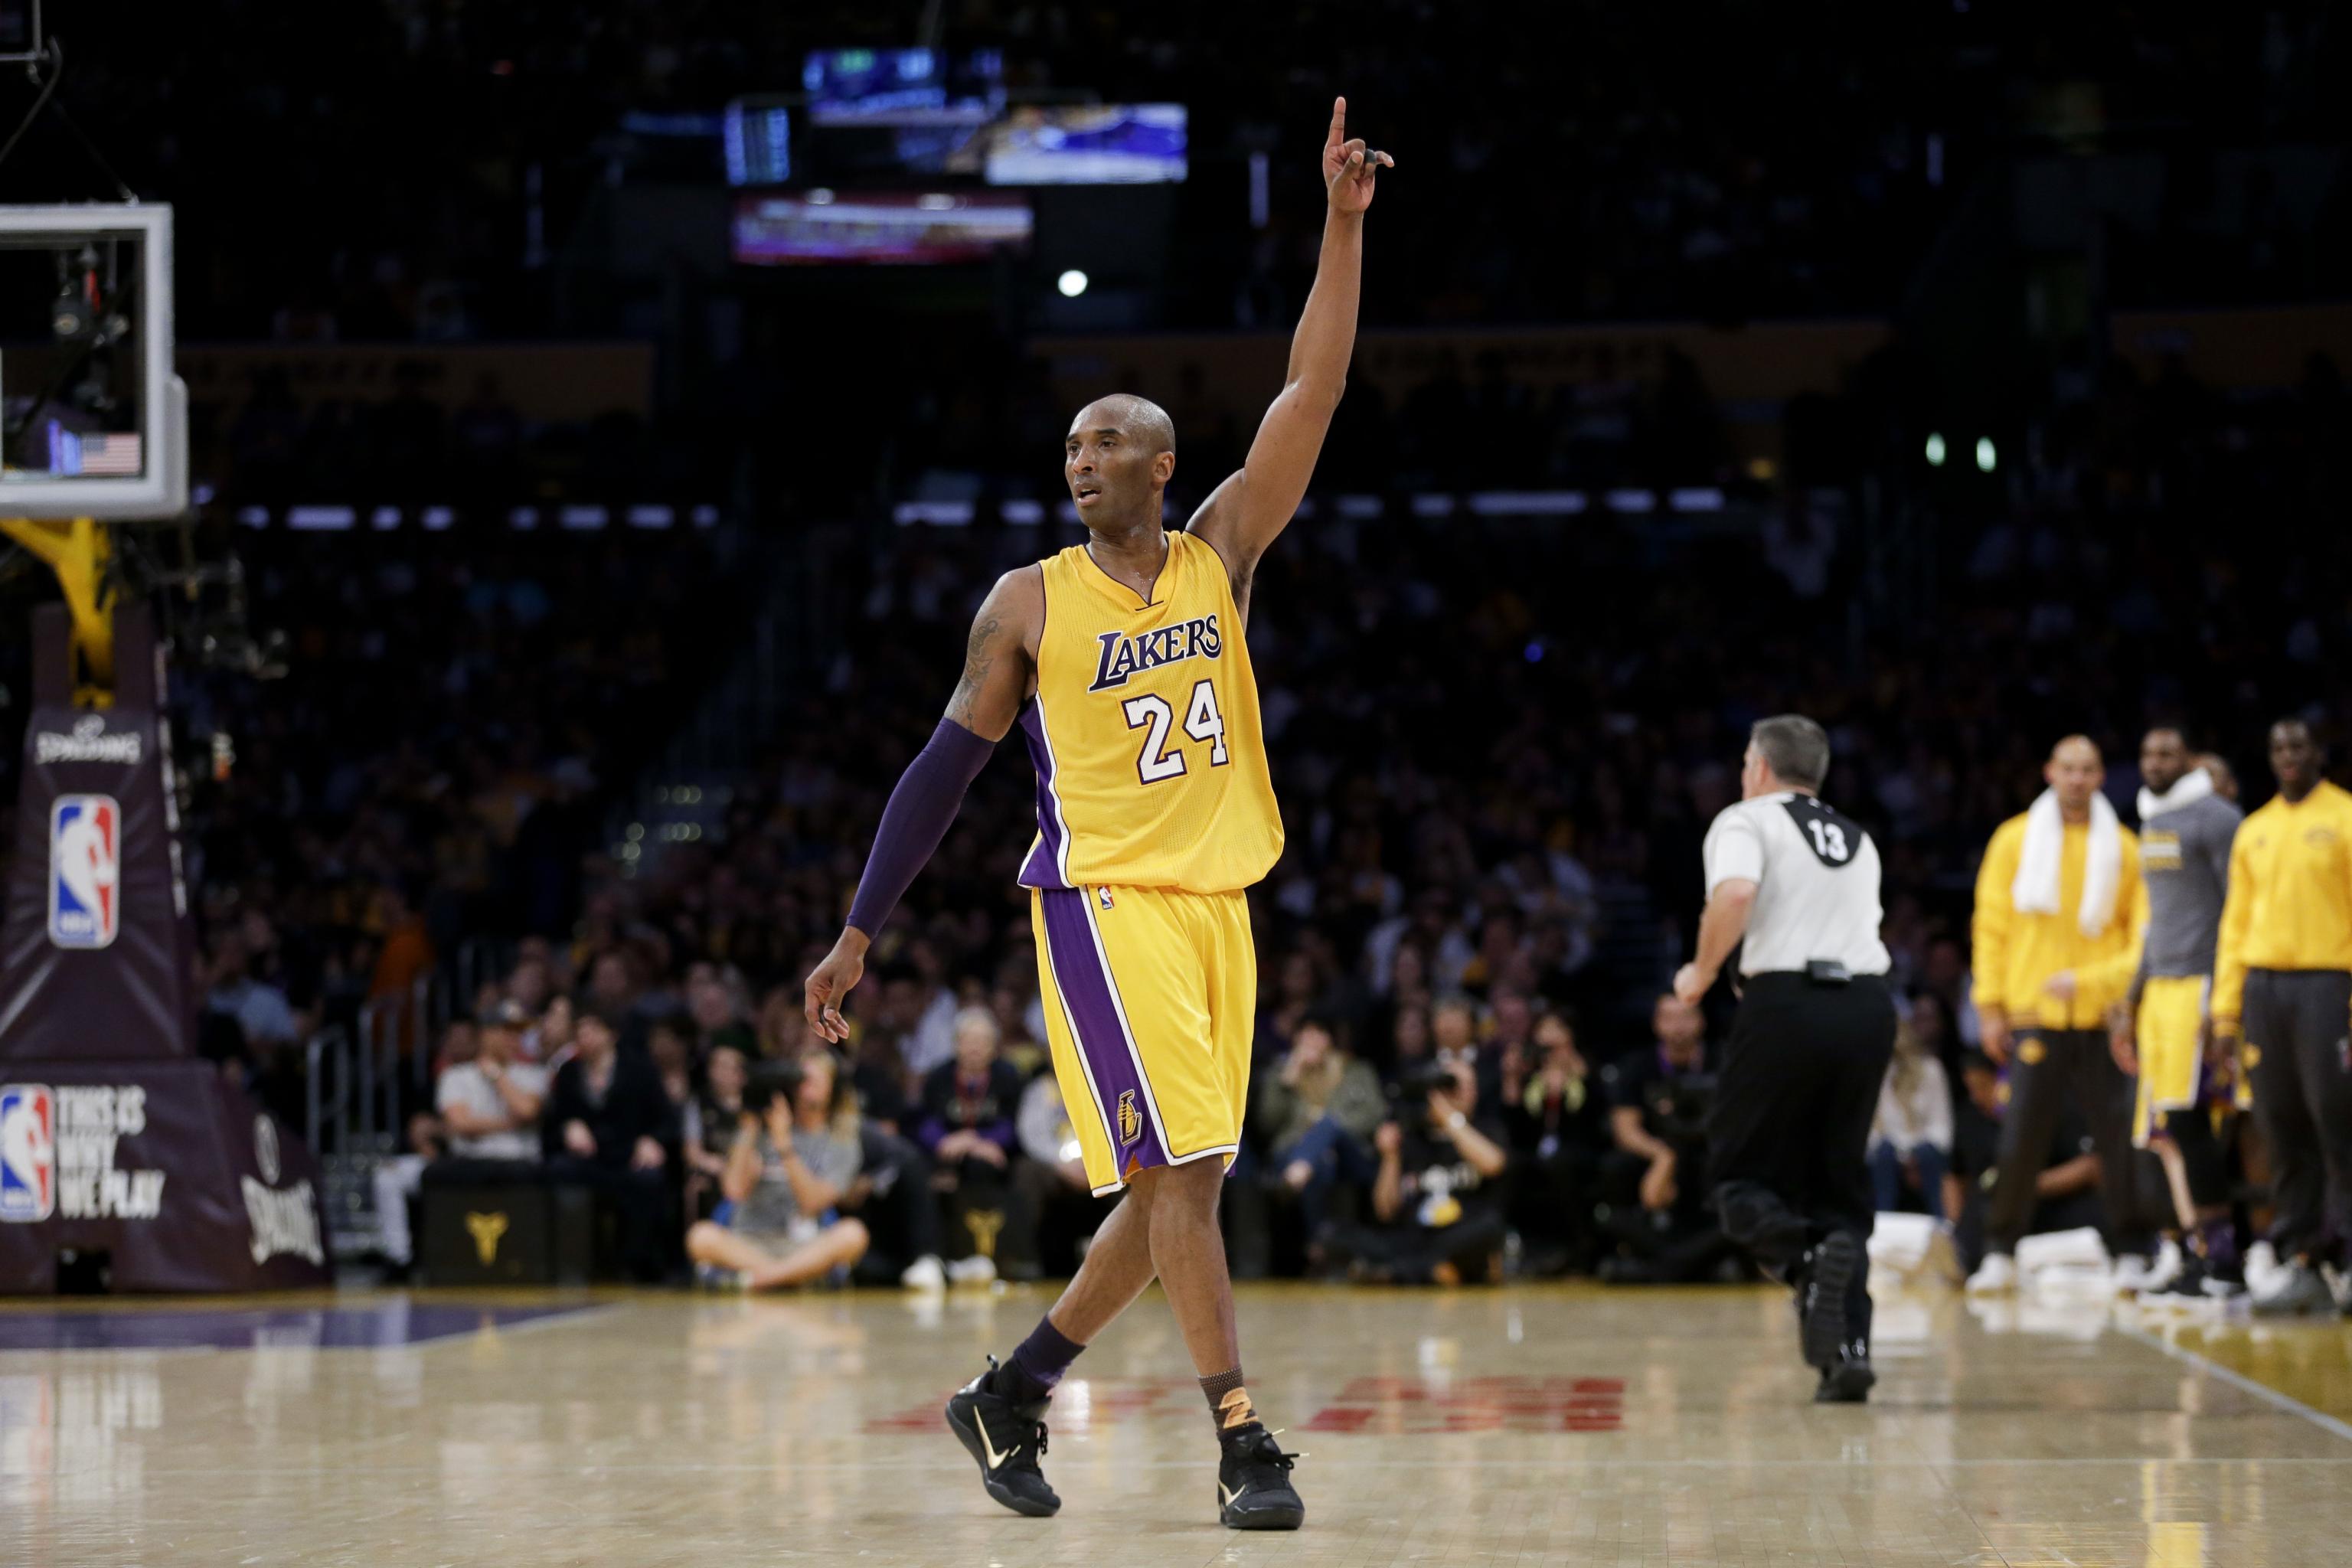 Why Kobe Bryant Changed His Lakers Jersey Number From No.8 to No